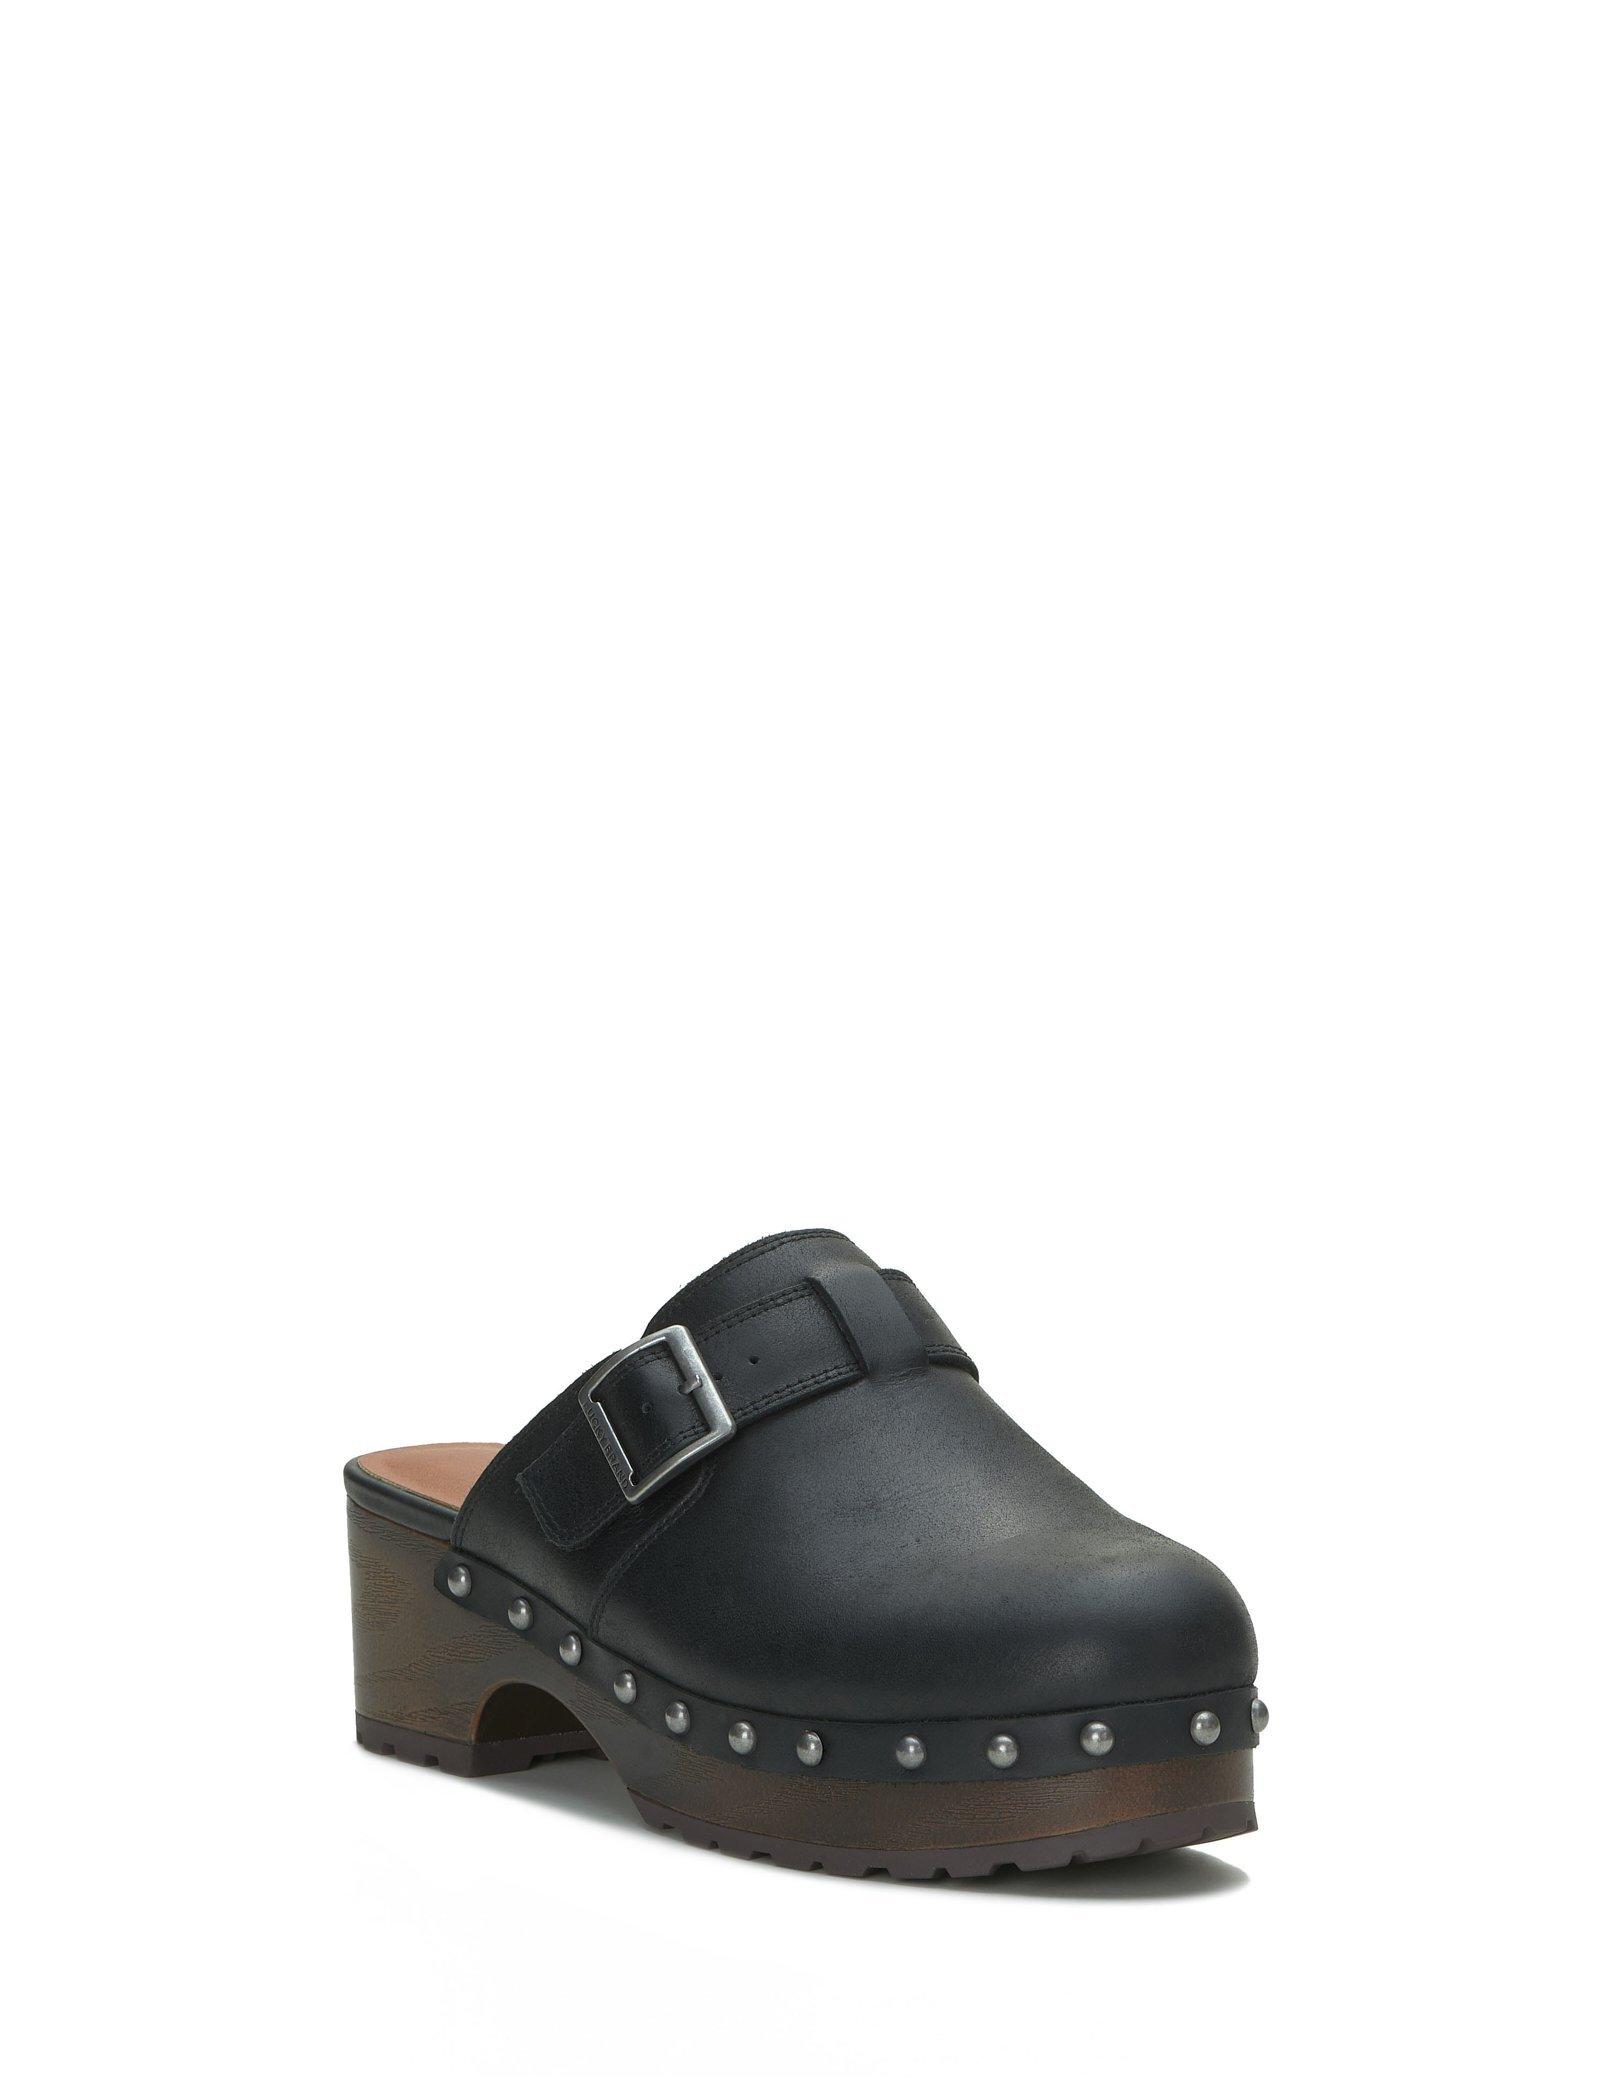 Lucky Brand Belvy Studded Clog - Women's Ladies Accessories Jewelry Earrings Black